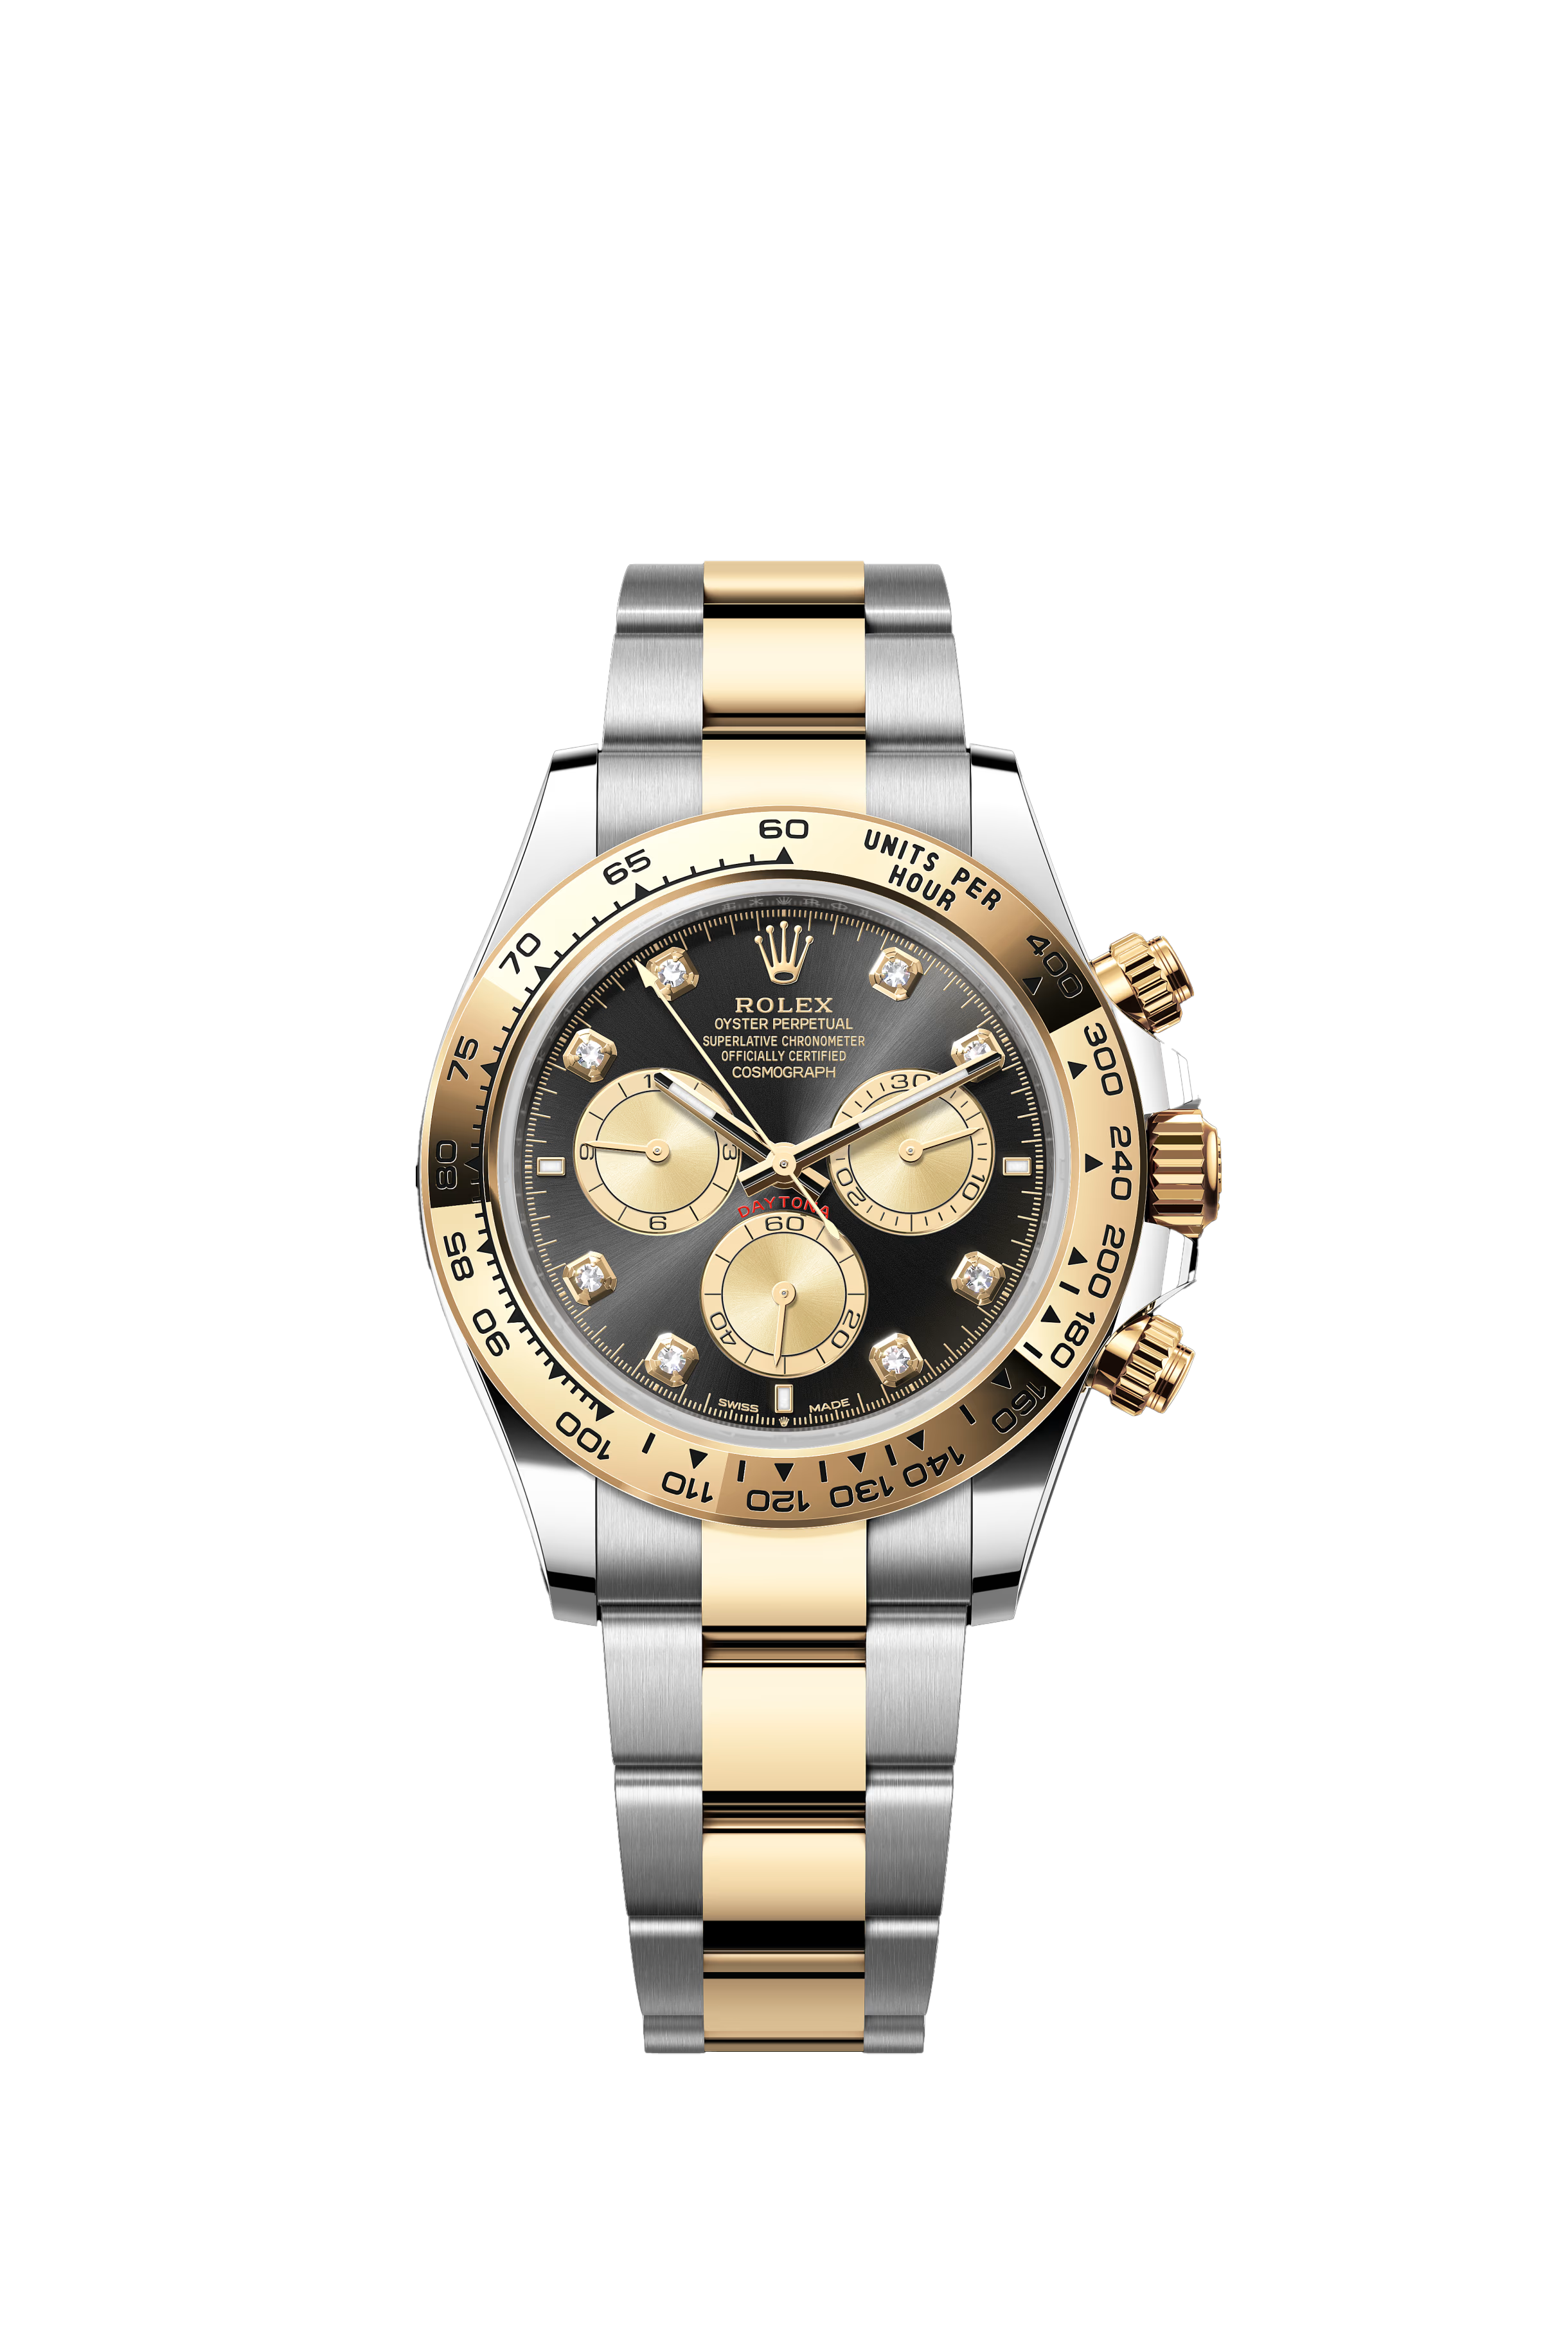 Rolex Cosmograph Daytona Oyster, 40 mm, Oystersteel and yellow gold Reference 126503